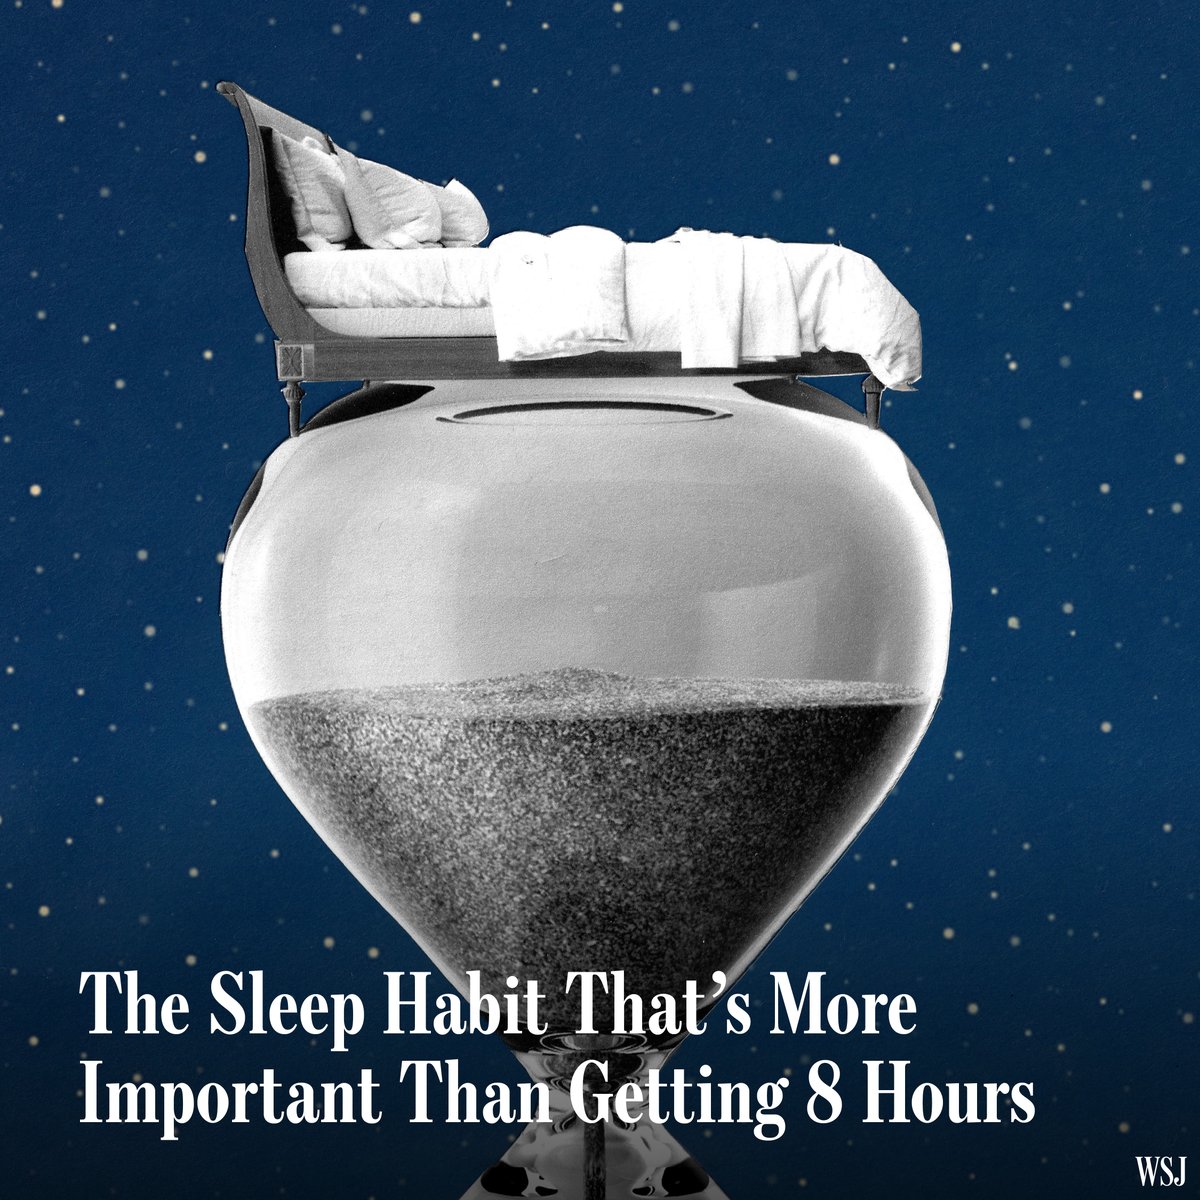 Can you sleep your way to a longer life? Scientists home in on the link between sleep and longevity on.wsj.com/49QtQOv